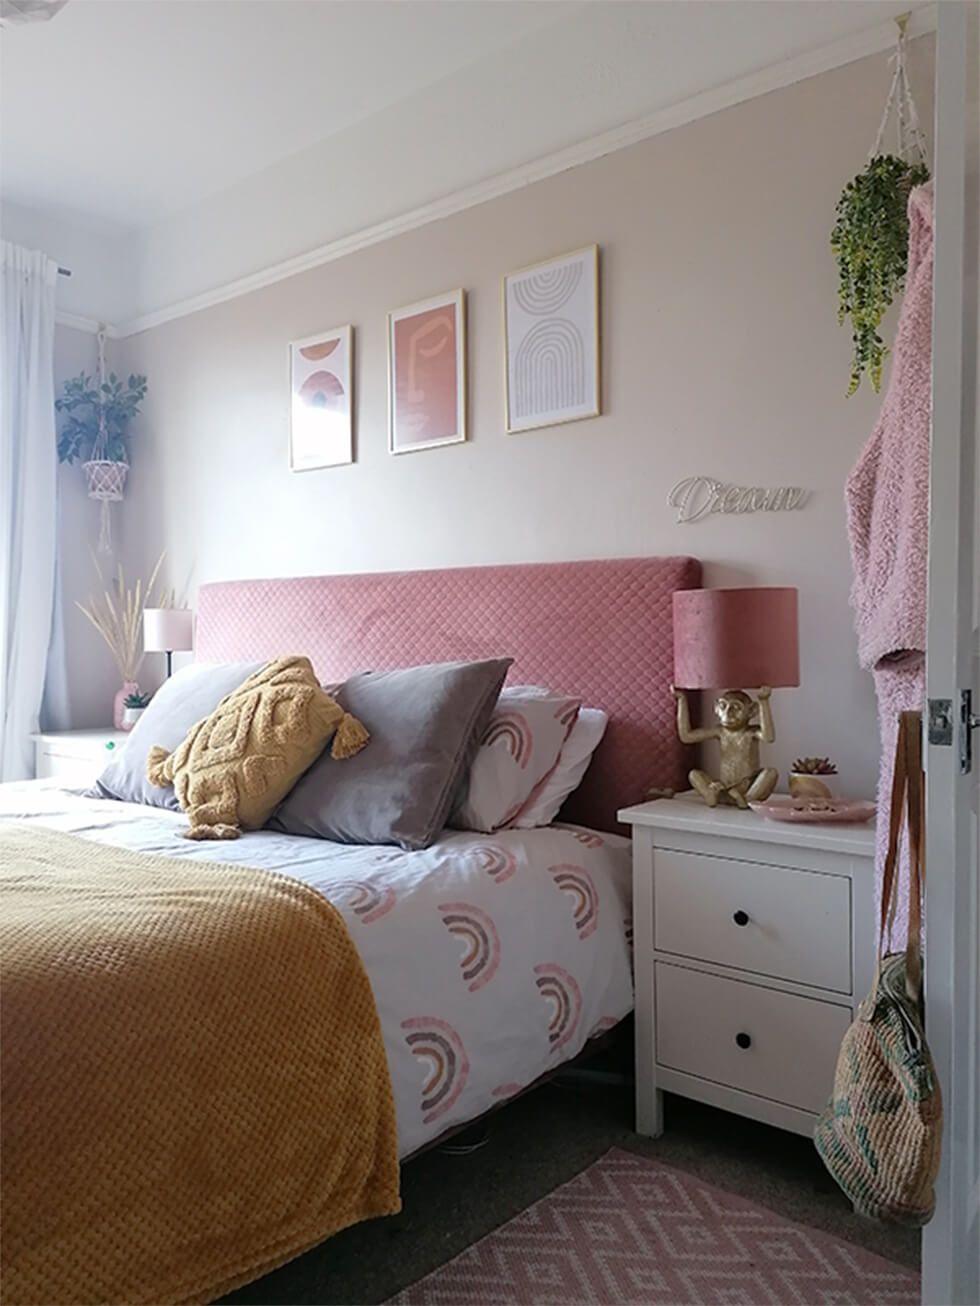 Homes We Love: Fun pink accents | Inspiration | Furniture And Choice